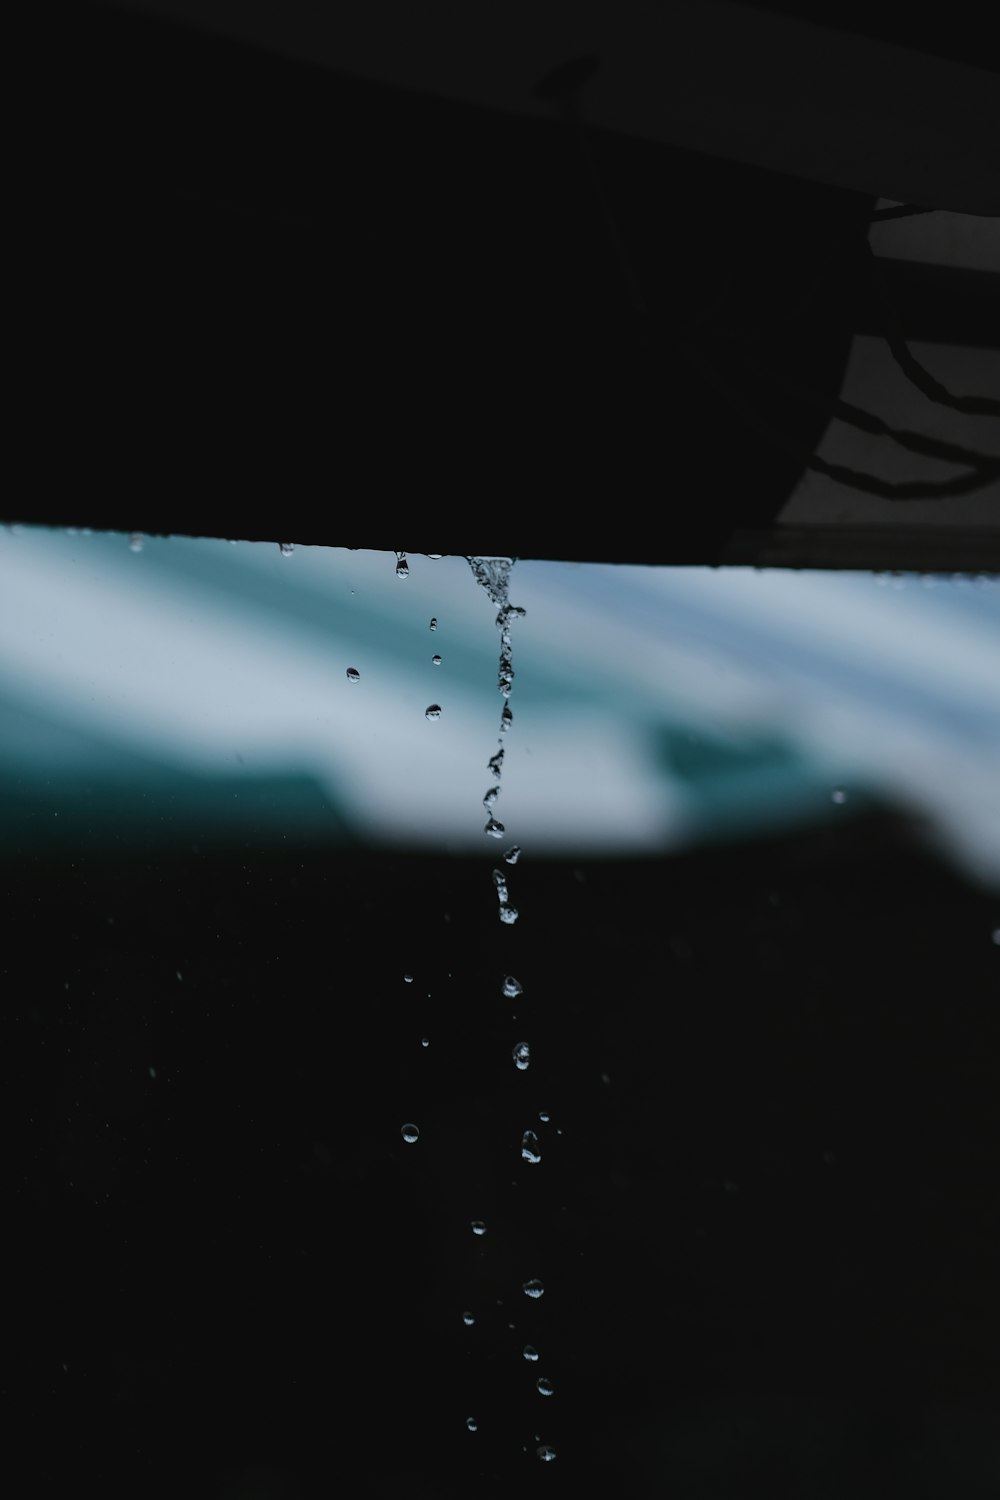 low-light photo of water drops